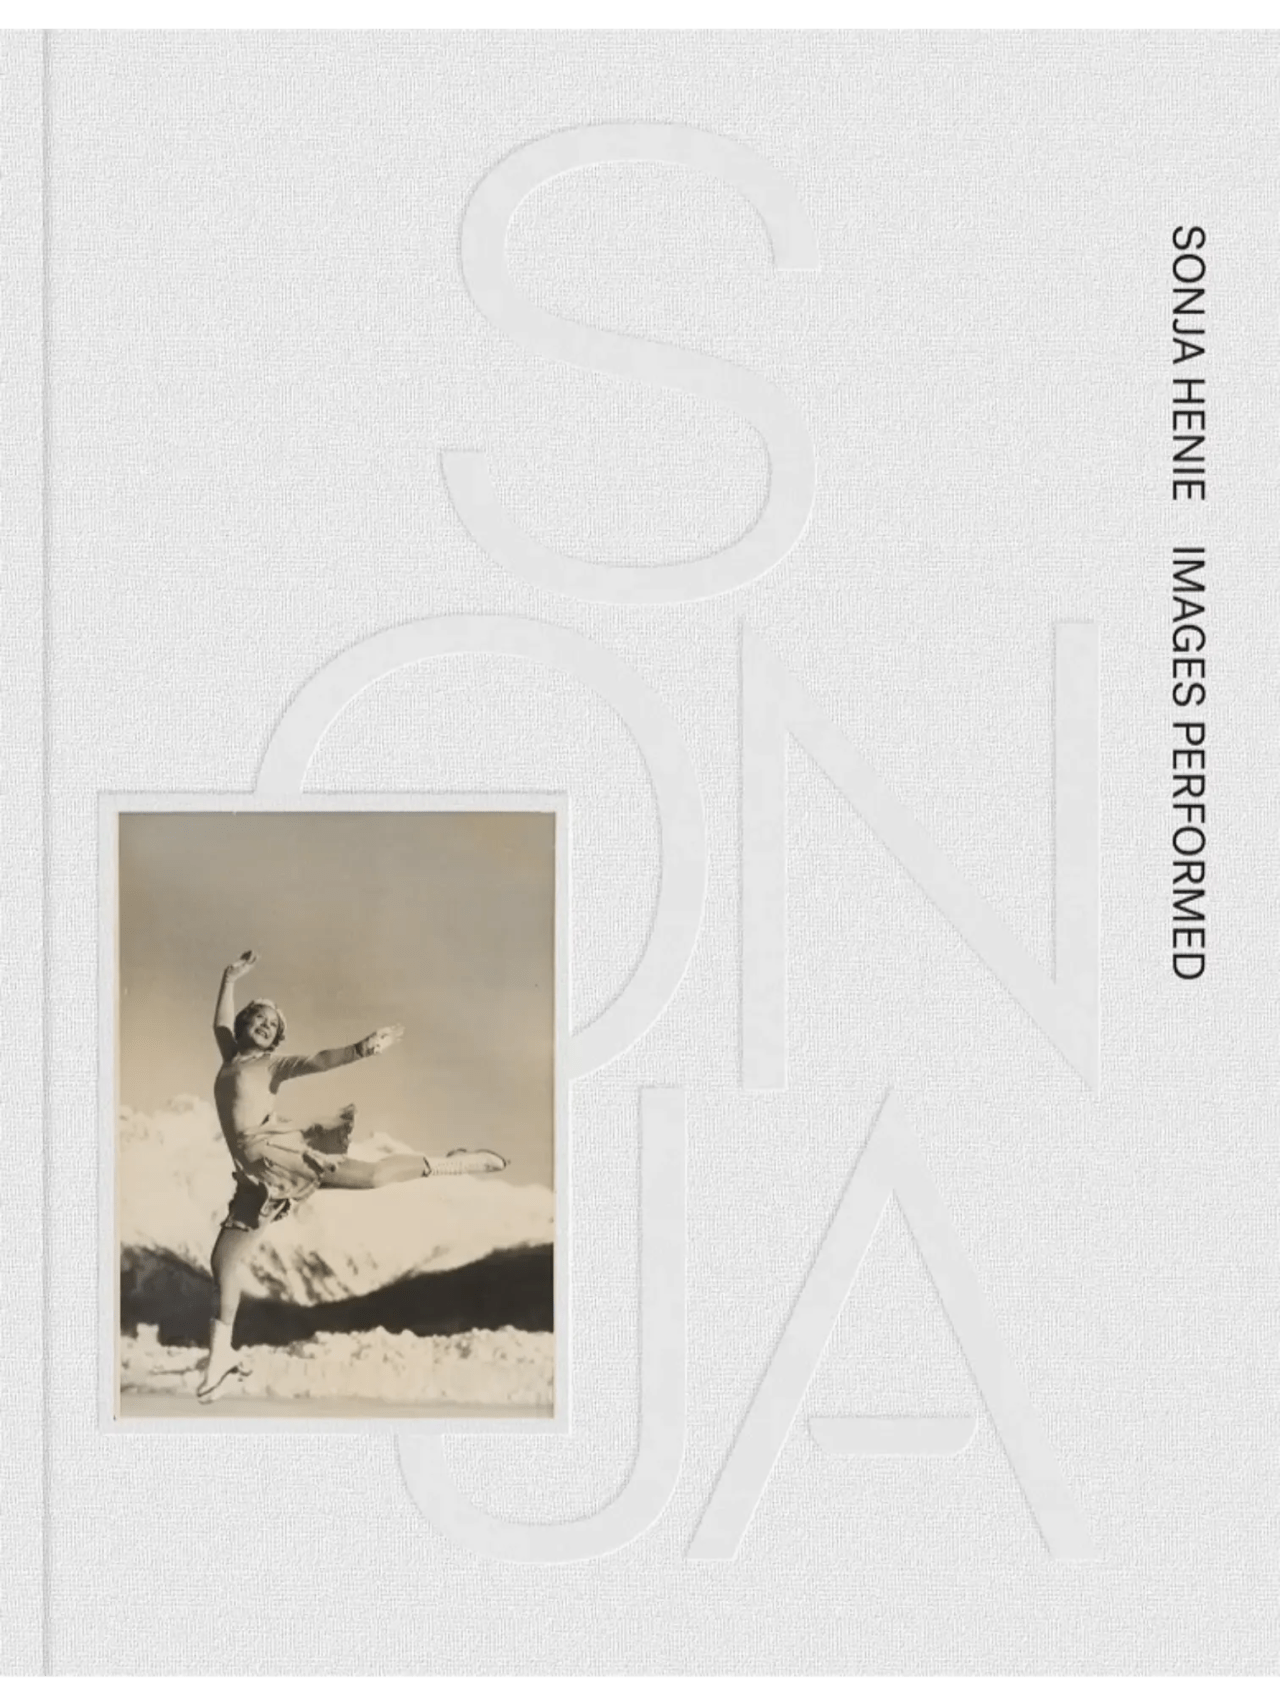 Book cover with a woman ice skater leaping through the air